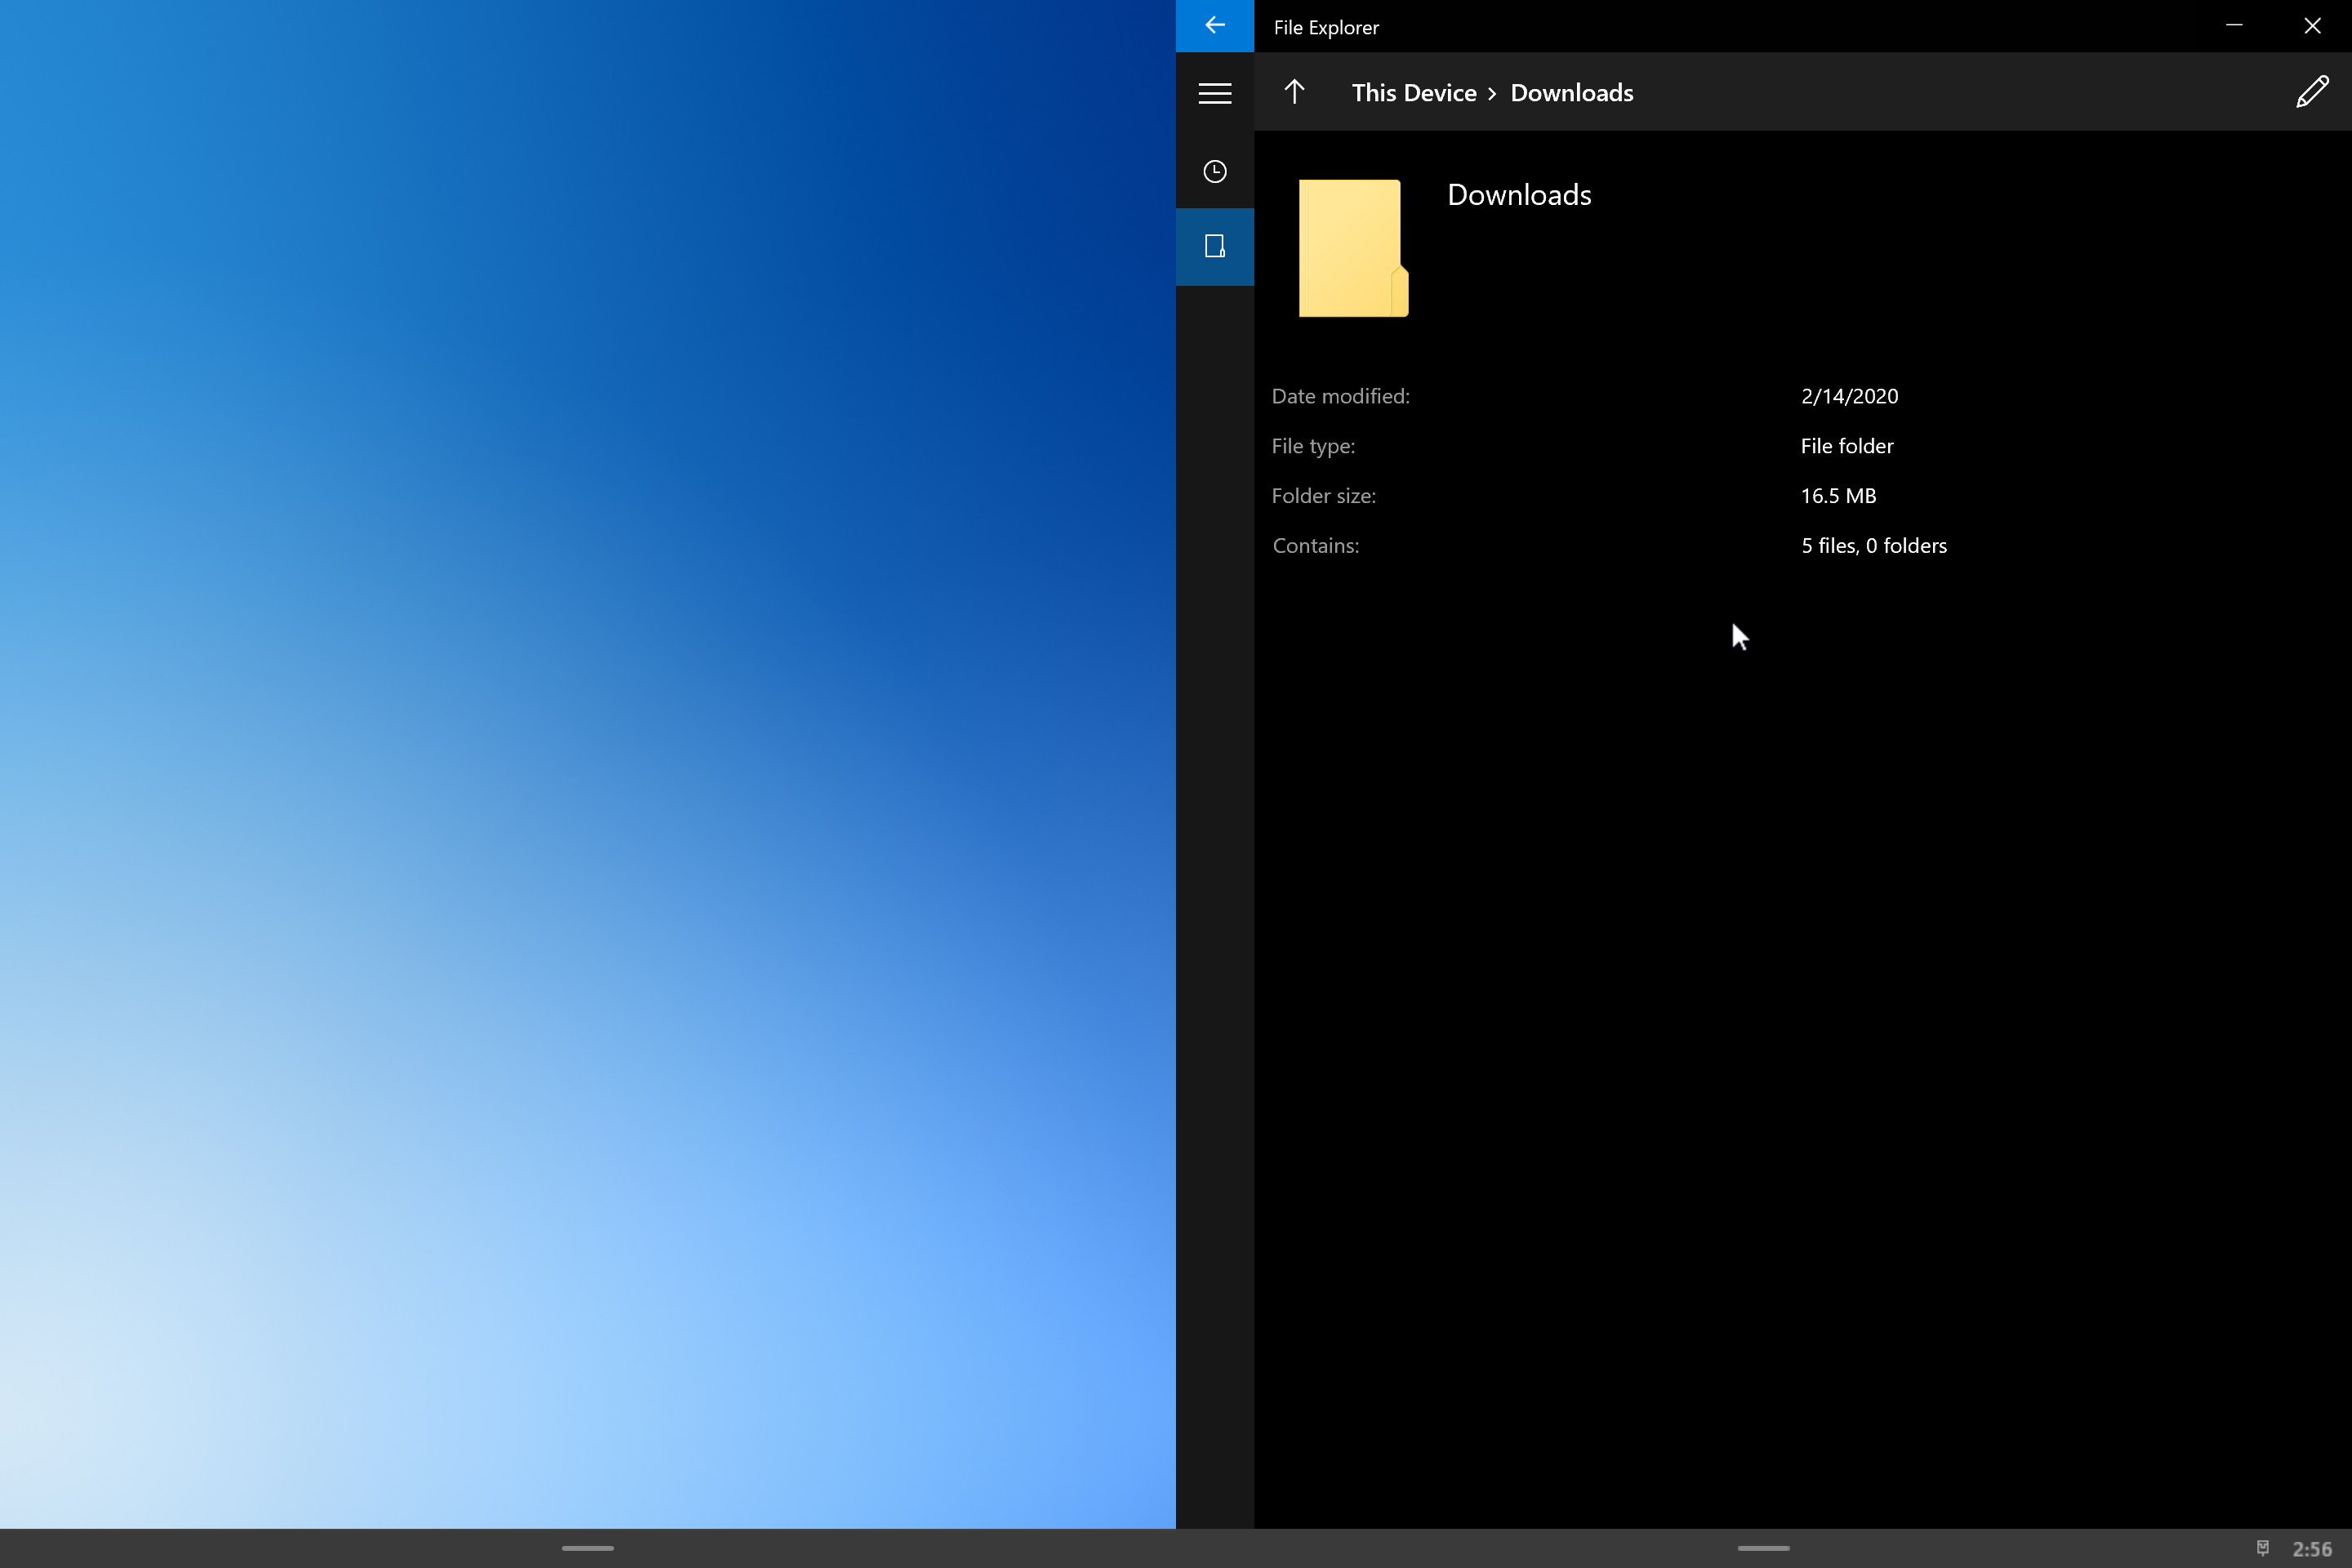 This Is the New File Explorer in Windows 10X